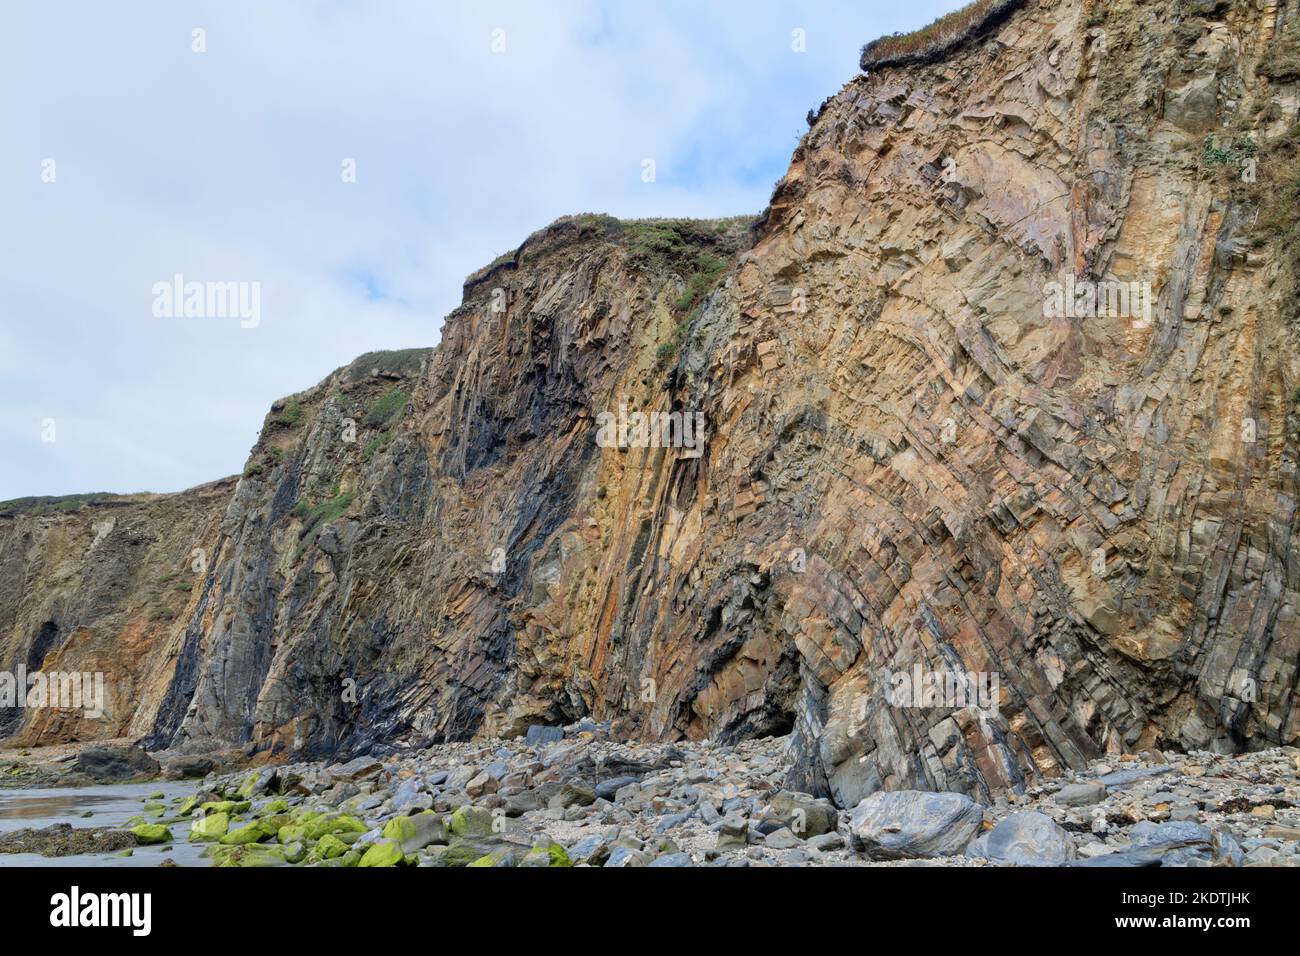 Old red sandstone coastal cliffs with twisted deformed strata, Newport, Pembrokeshire, Wales, UK, July. Stock Photo